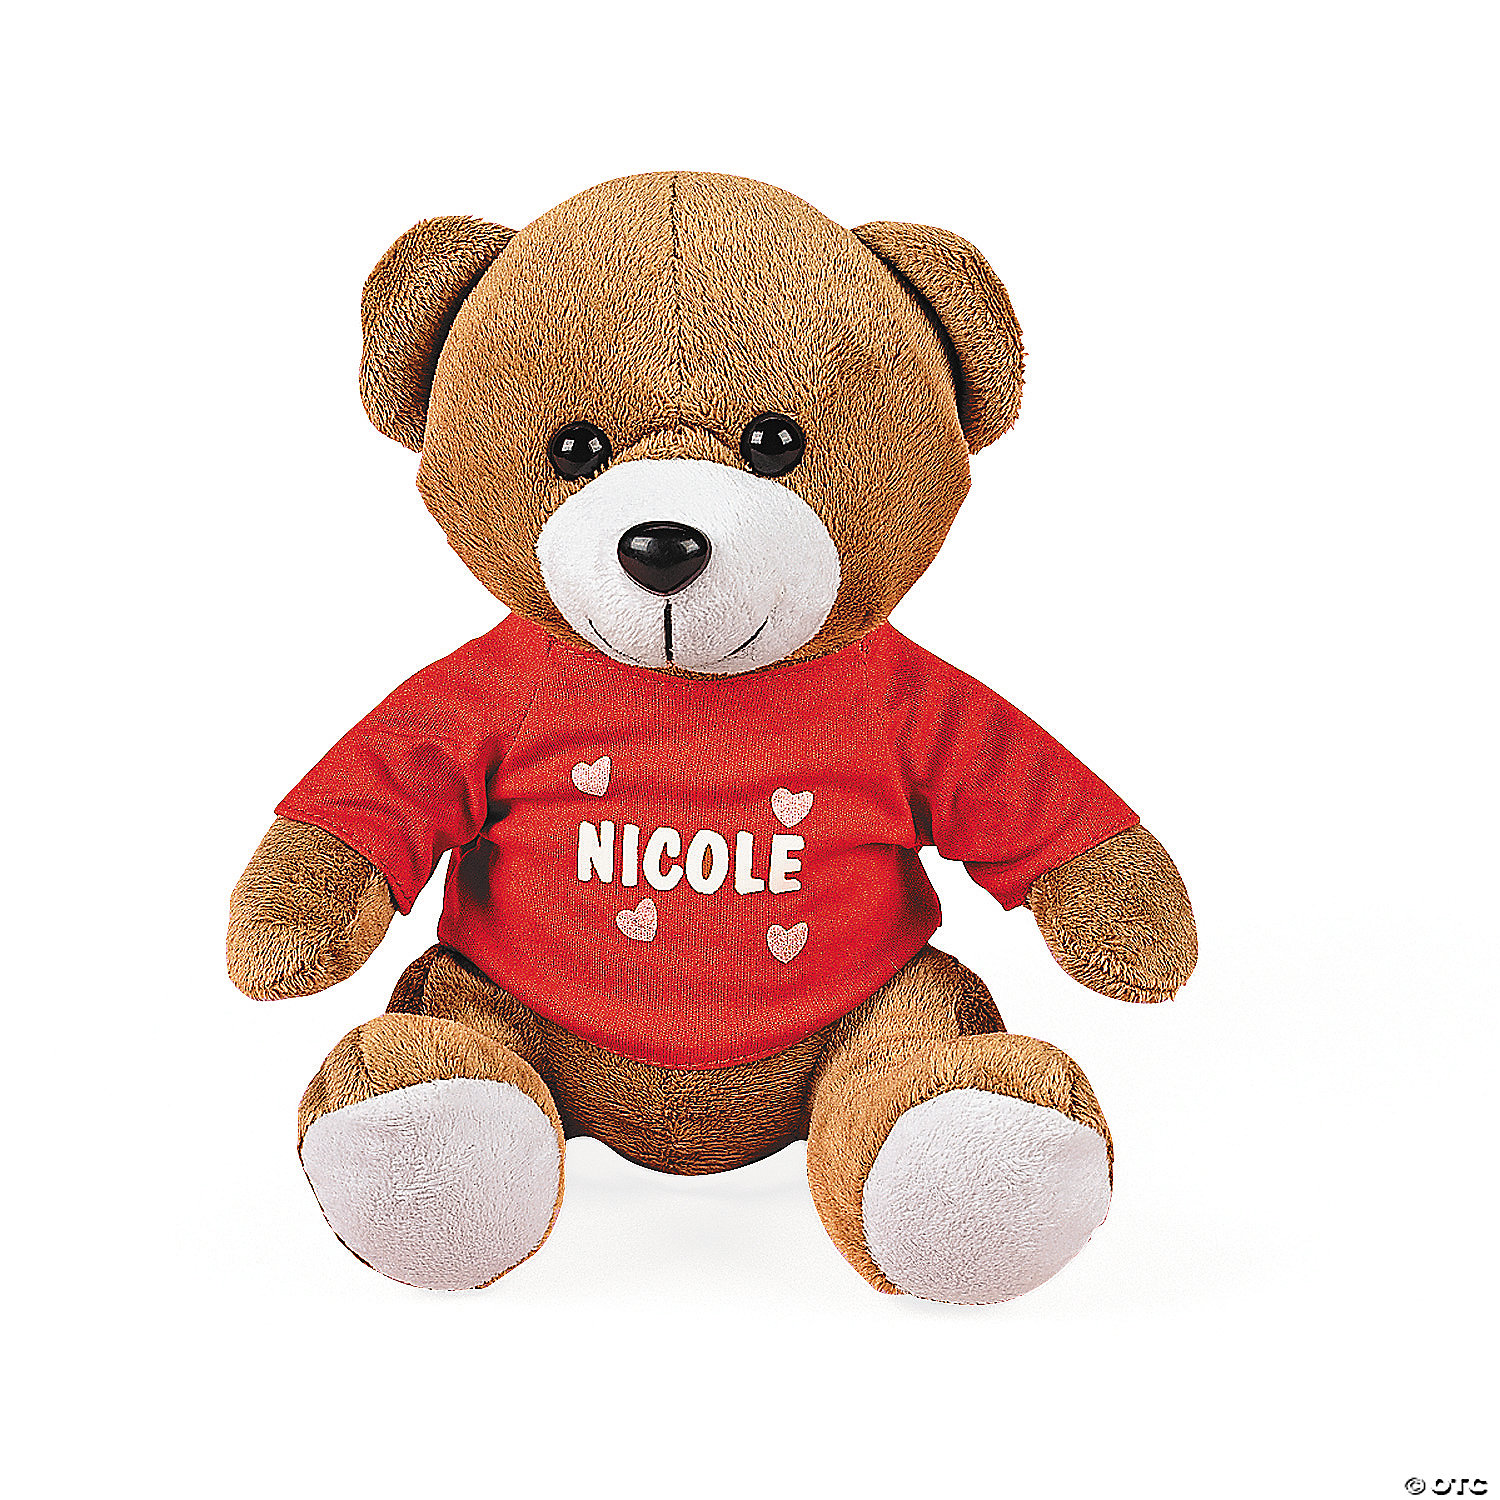 personalized stuffed animals for valentine's day